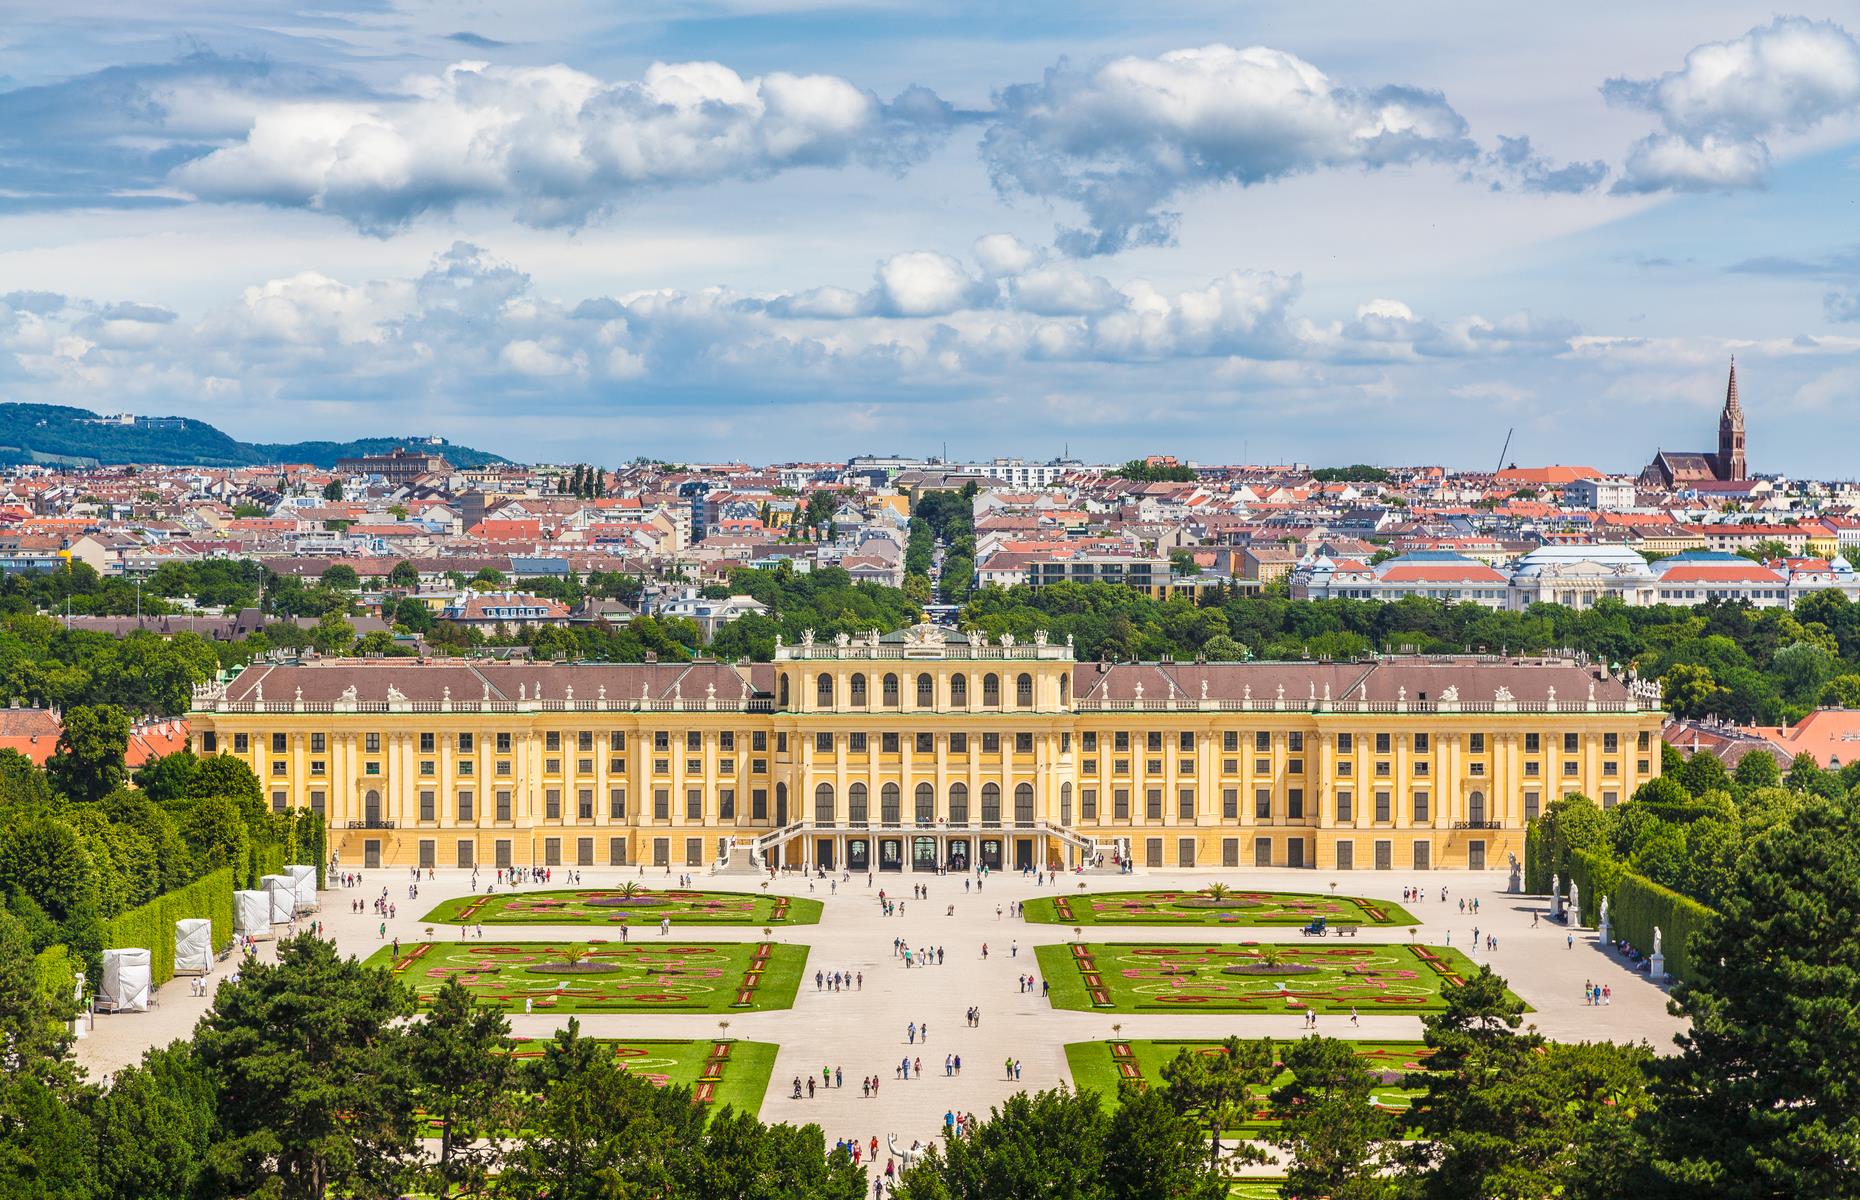 <p><a href="https://www.loveexploring.com/guides/140494/things-to-do-restaurants-in-vienna-hotel-museums">Vienna</a> claims many of the country’s top attractions, including the incredible Schönbrunn Palace (pictured), as well as lots of gorgeous cafés offering mouth-watering Viennese cakes (be sure to try the famous Sachertorte). But it’s not just the capital that’s worth a visit. Mountainous Tyrol has fantastic skiing and the annual summer Salzburg festival welcomes thousands of culture lovers for a showcase of theater, opera and music.</p>